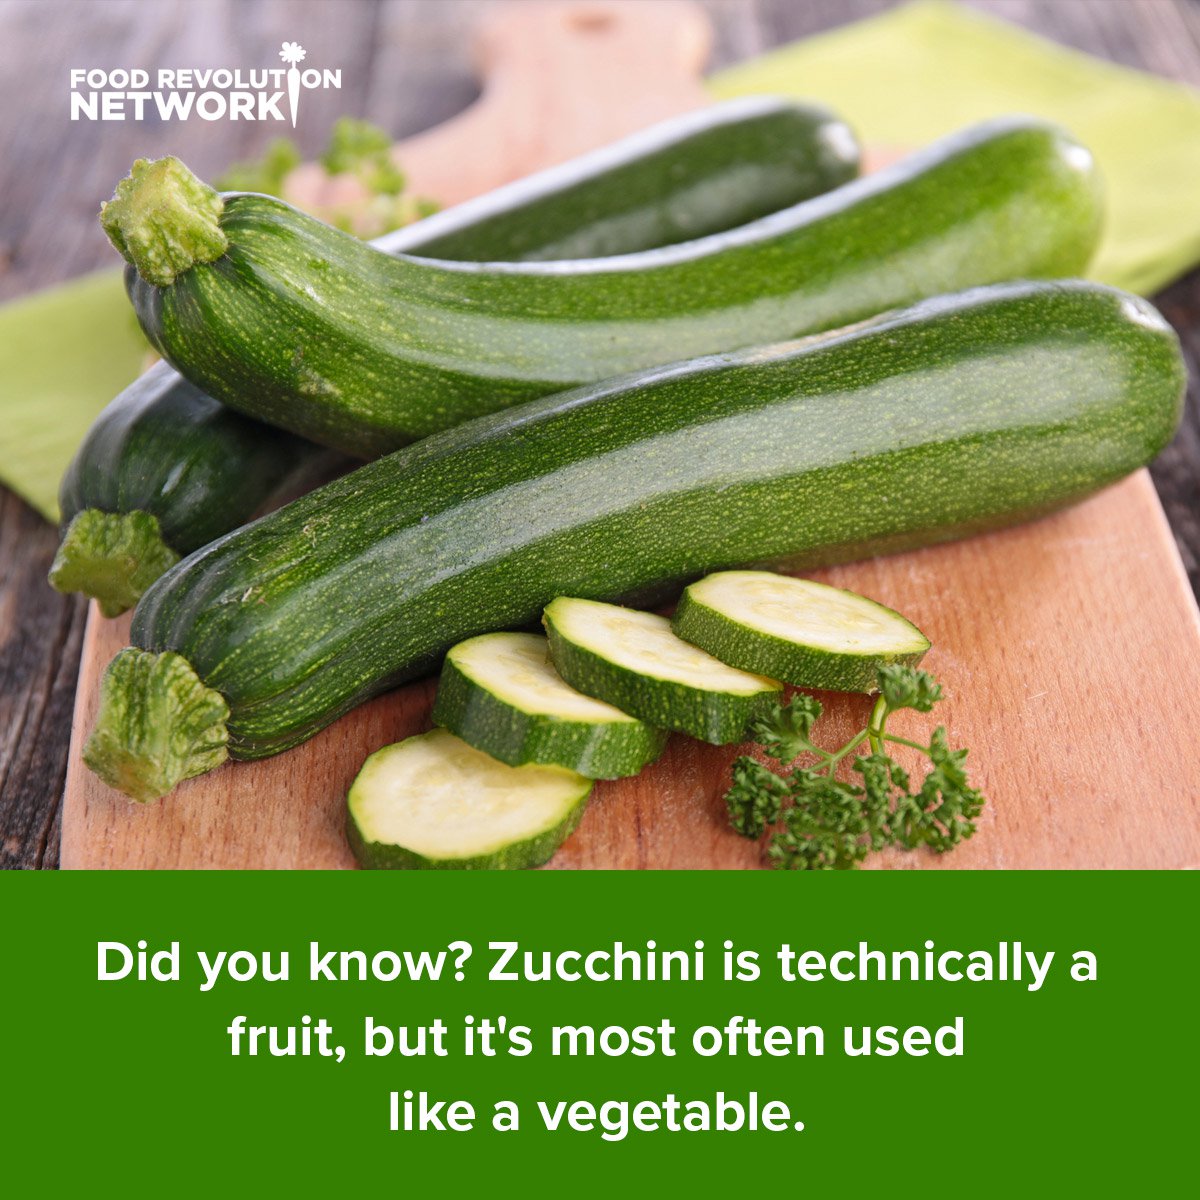 Did you know? Zucchini is technically a fruit, but it's most often used like a vegetable.